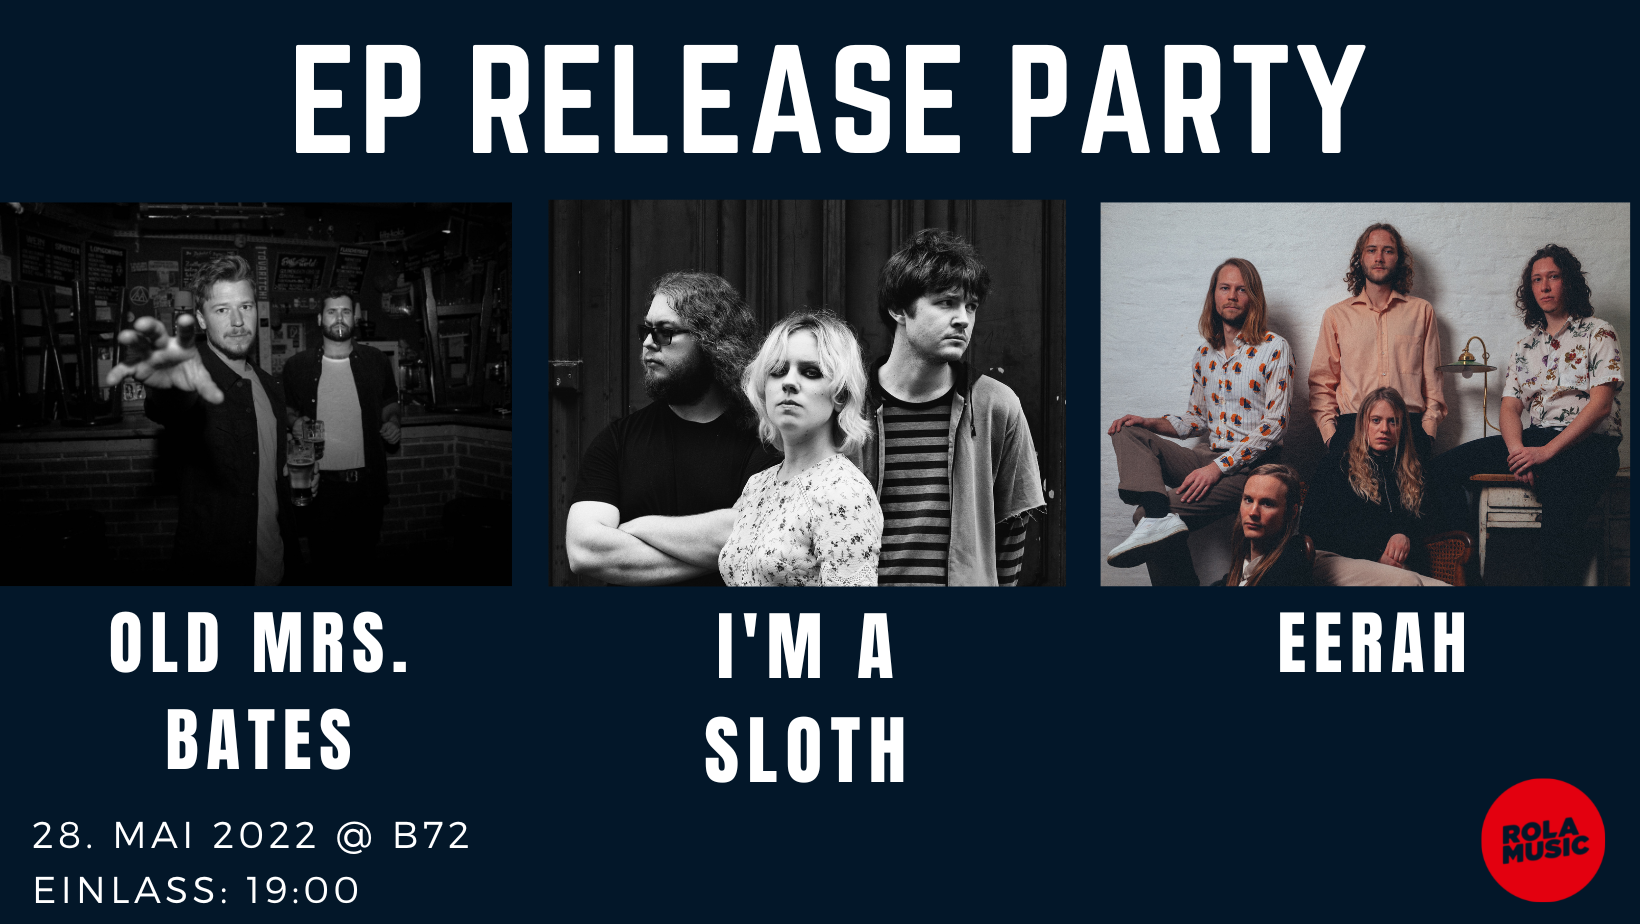 Old Mrs. Bates | EP Release + I'm a Sloth + Eerah am 28. May 2022 @ B72.